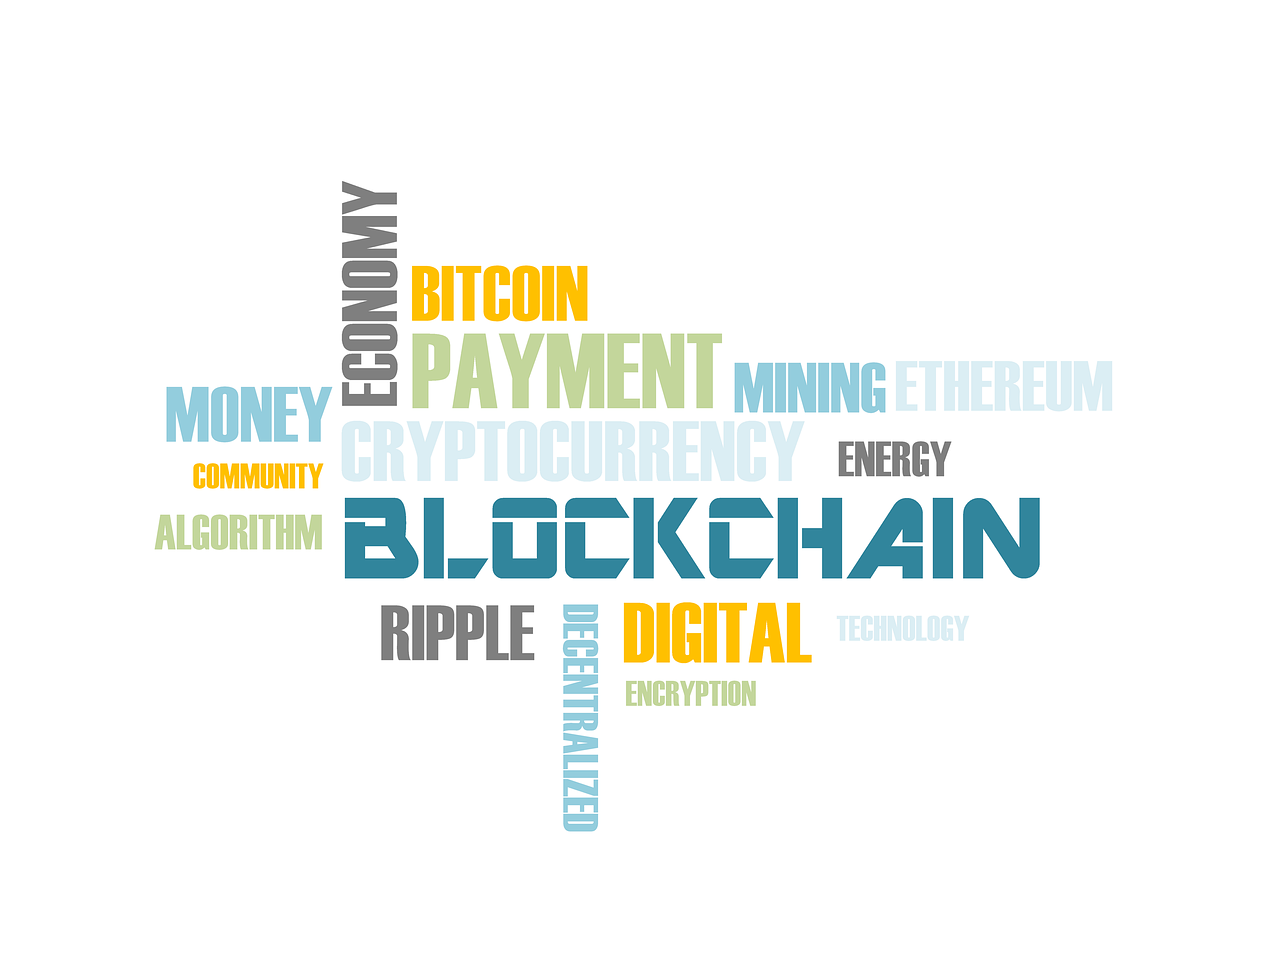 Blockchain and cryptocurrency